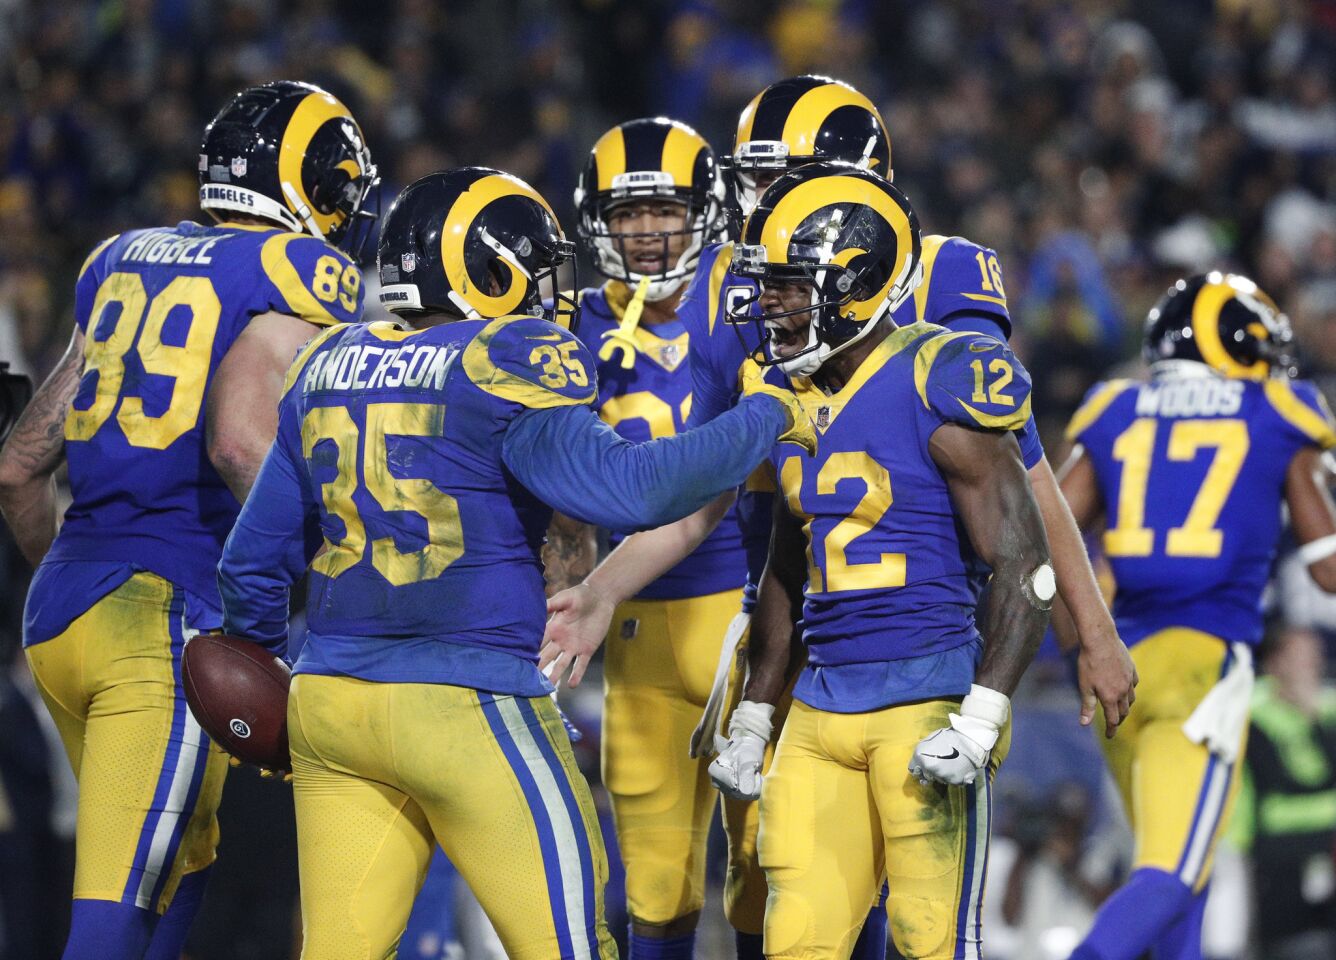 Rams running back C.J. Anderson (35) celebrates with receiver Brandin Cooks (12) and other teammates after he scored a touchdown on a fourth-down play in the fourth quarter.